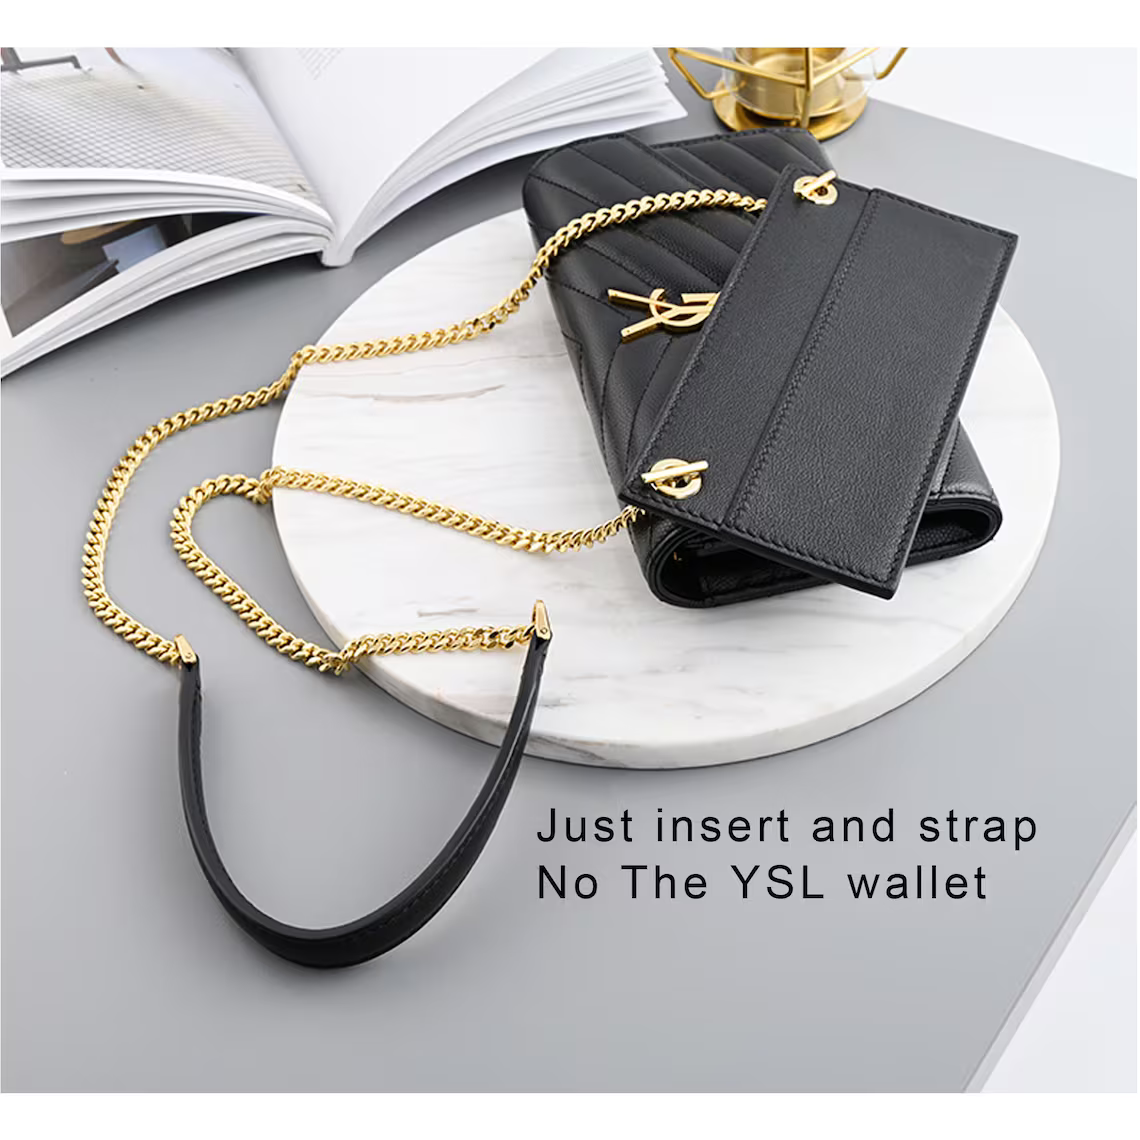 Black Swift leather insert and the chain wallet strap for Y.S.L wallet